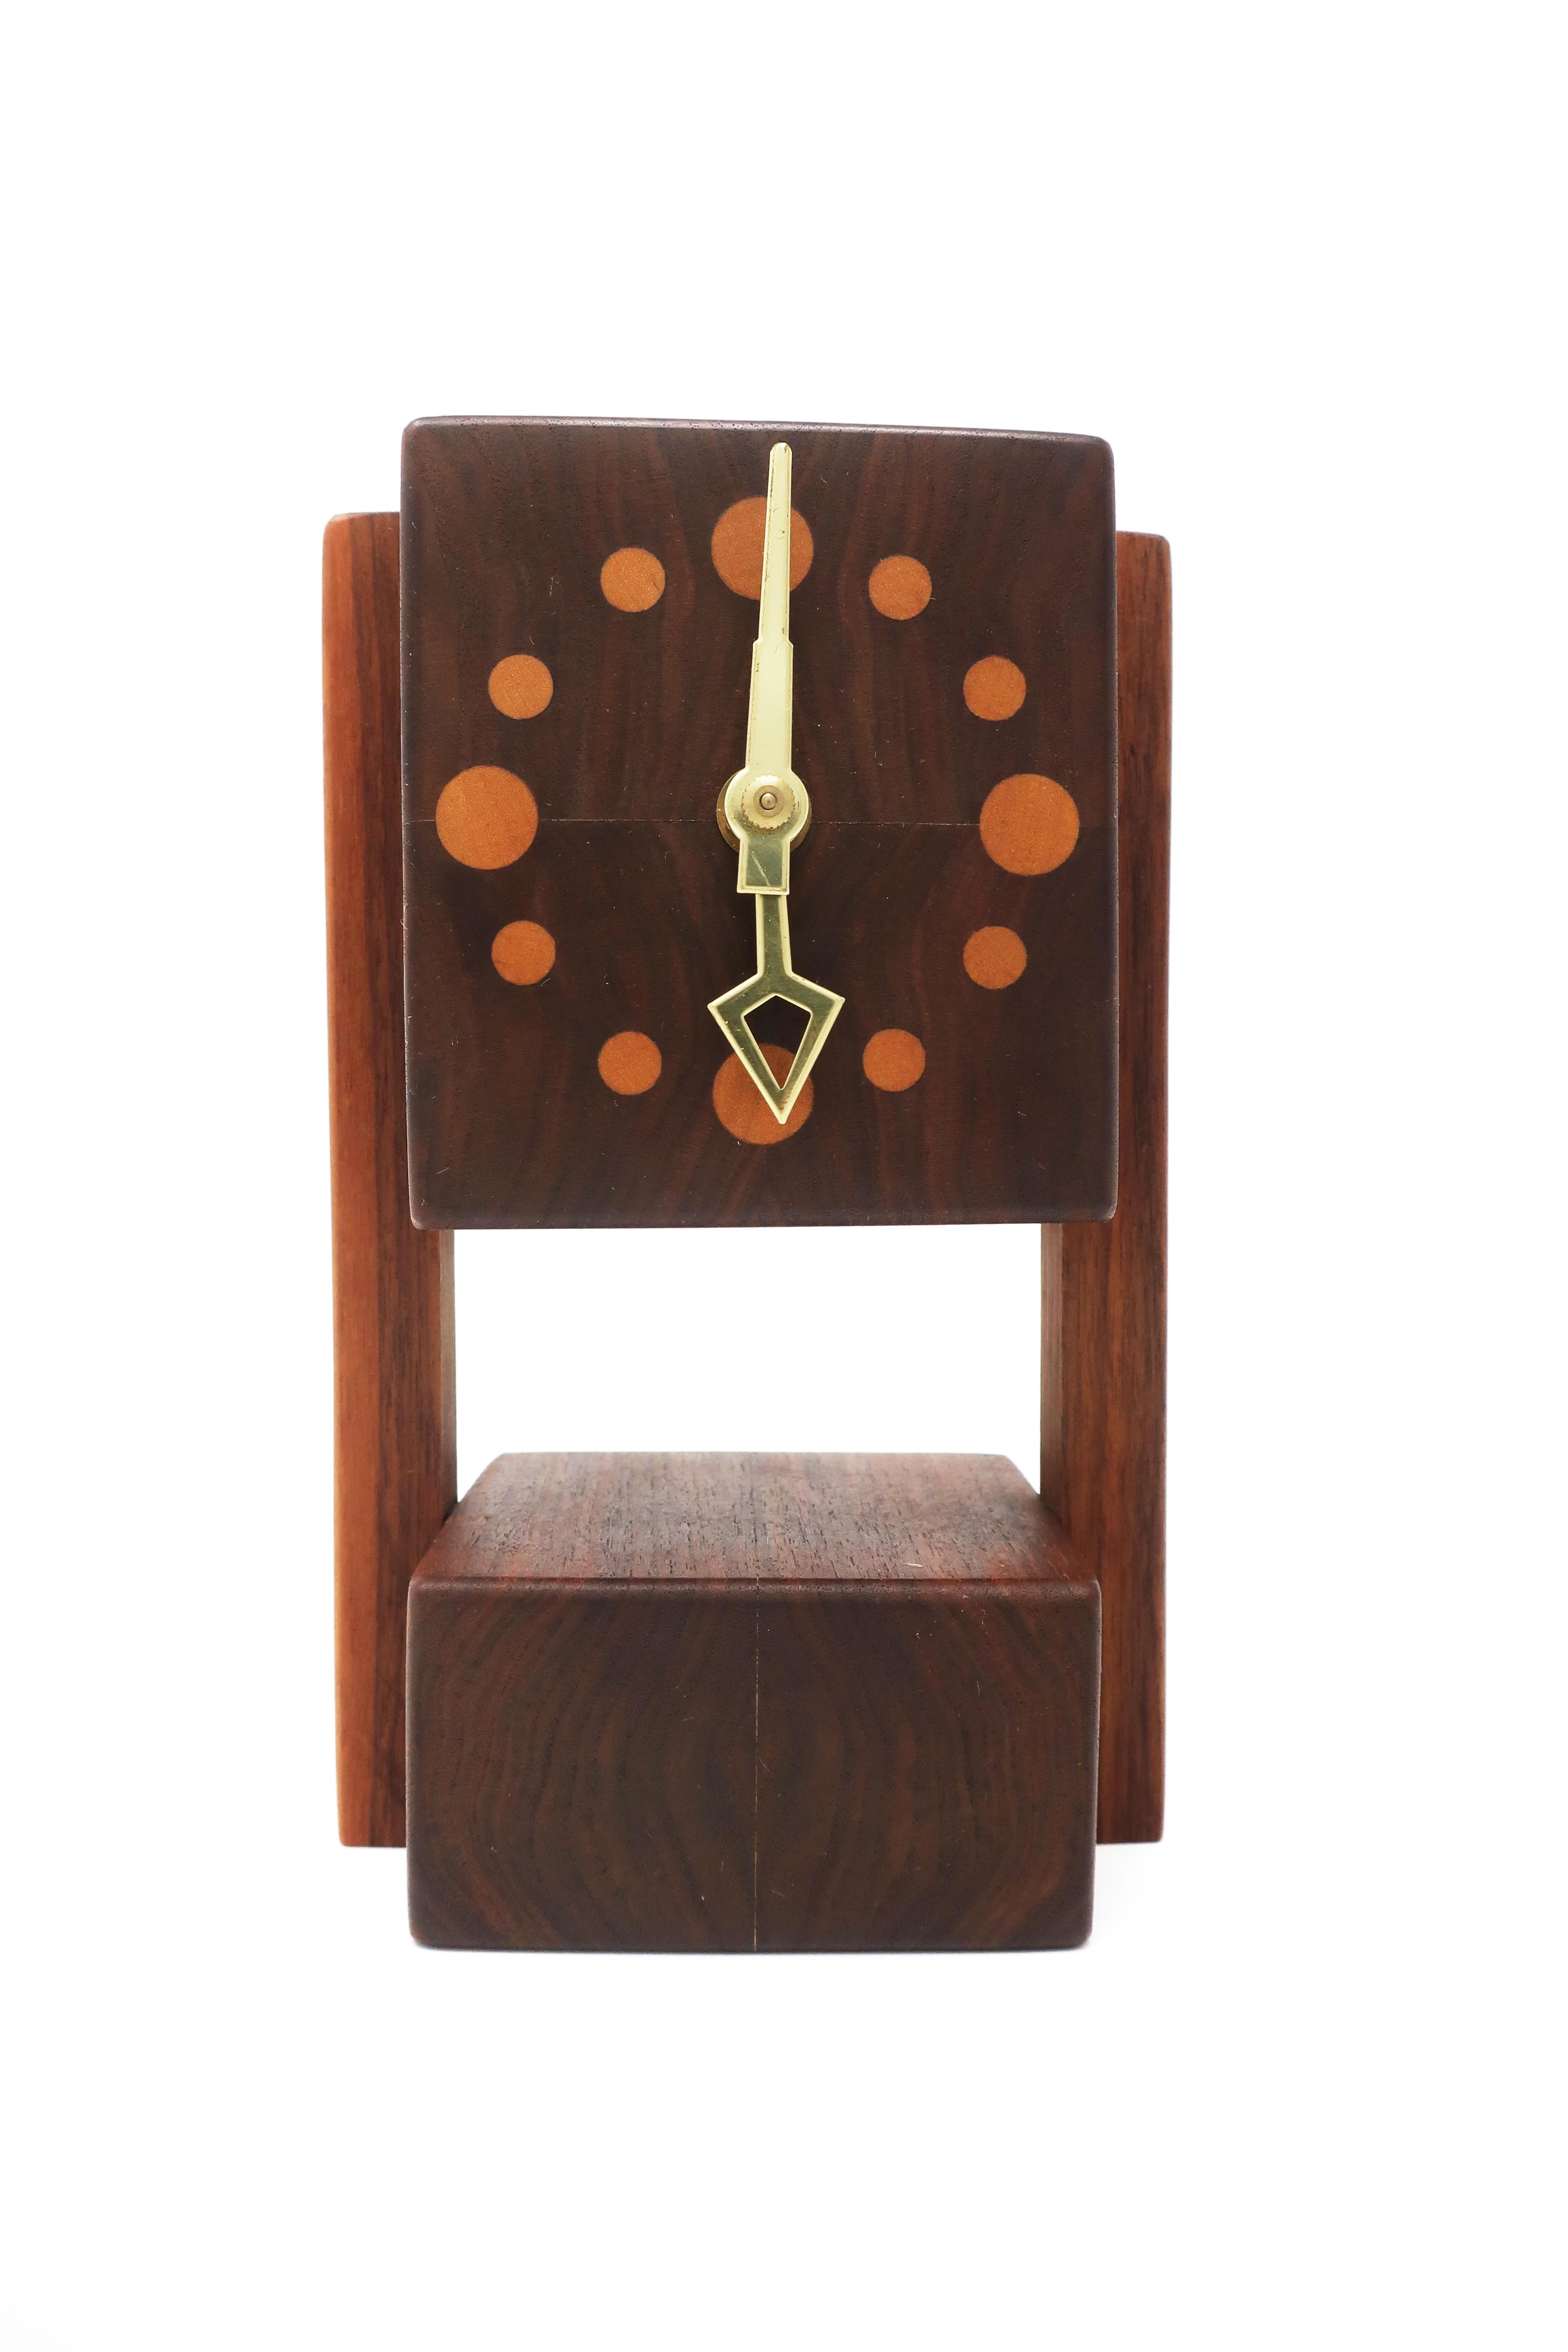 A lovely vintage wooden desk or mantel (fireplace) clock. The base, supports, and housing for the movement are teak, with contrasting lighter wood inset circles serving as the clock’s numbers. Front opens to reveal the clock’s movement.

In